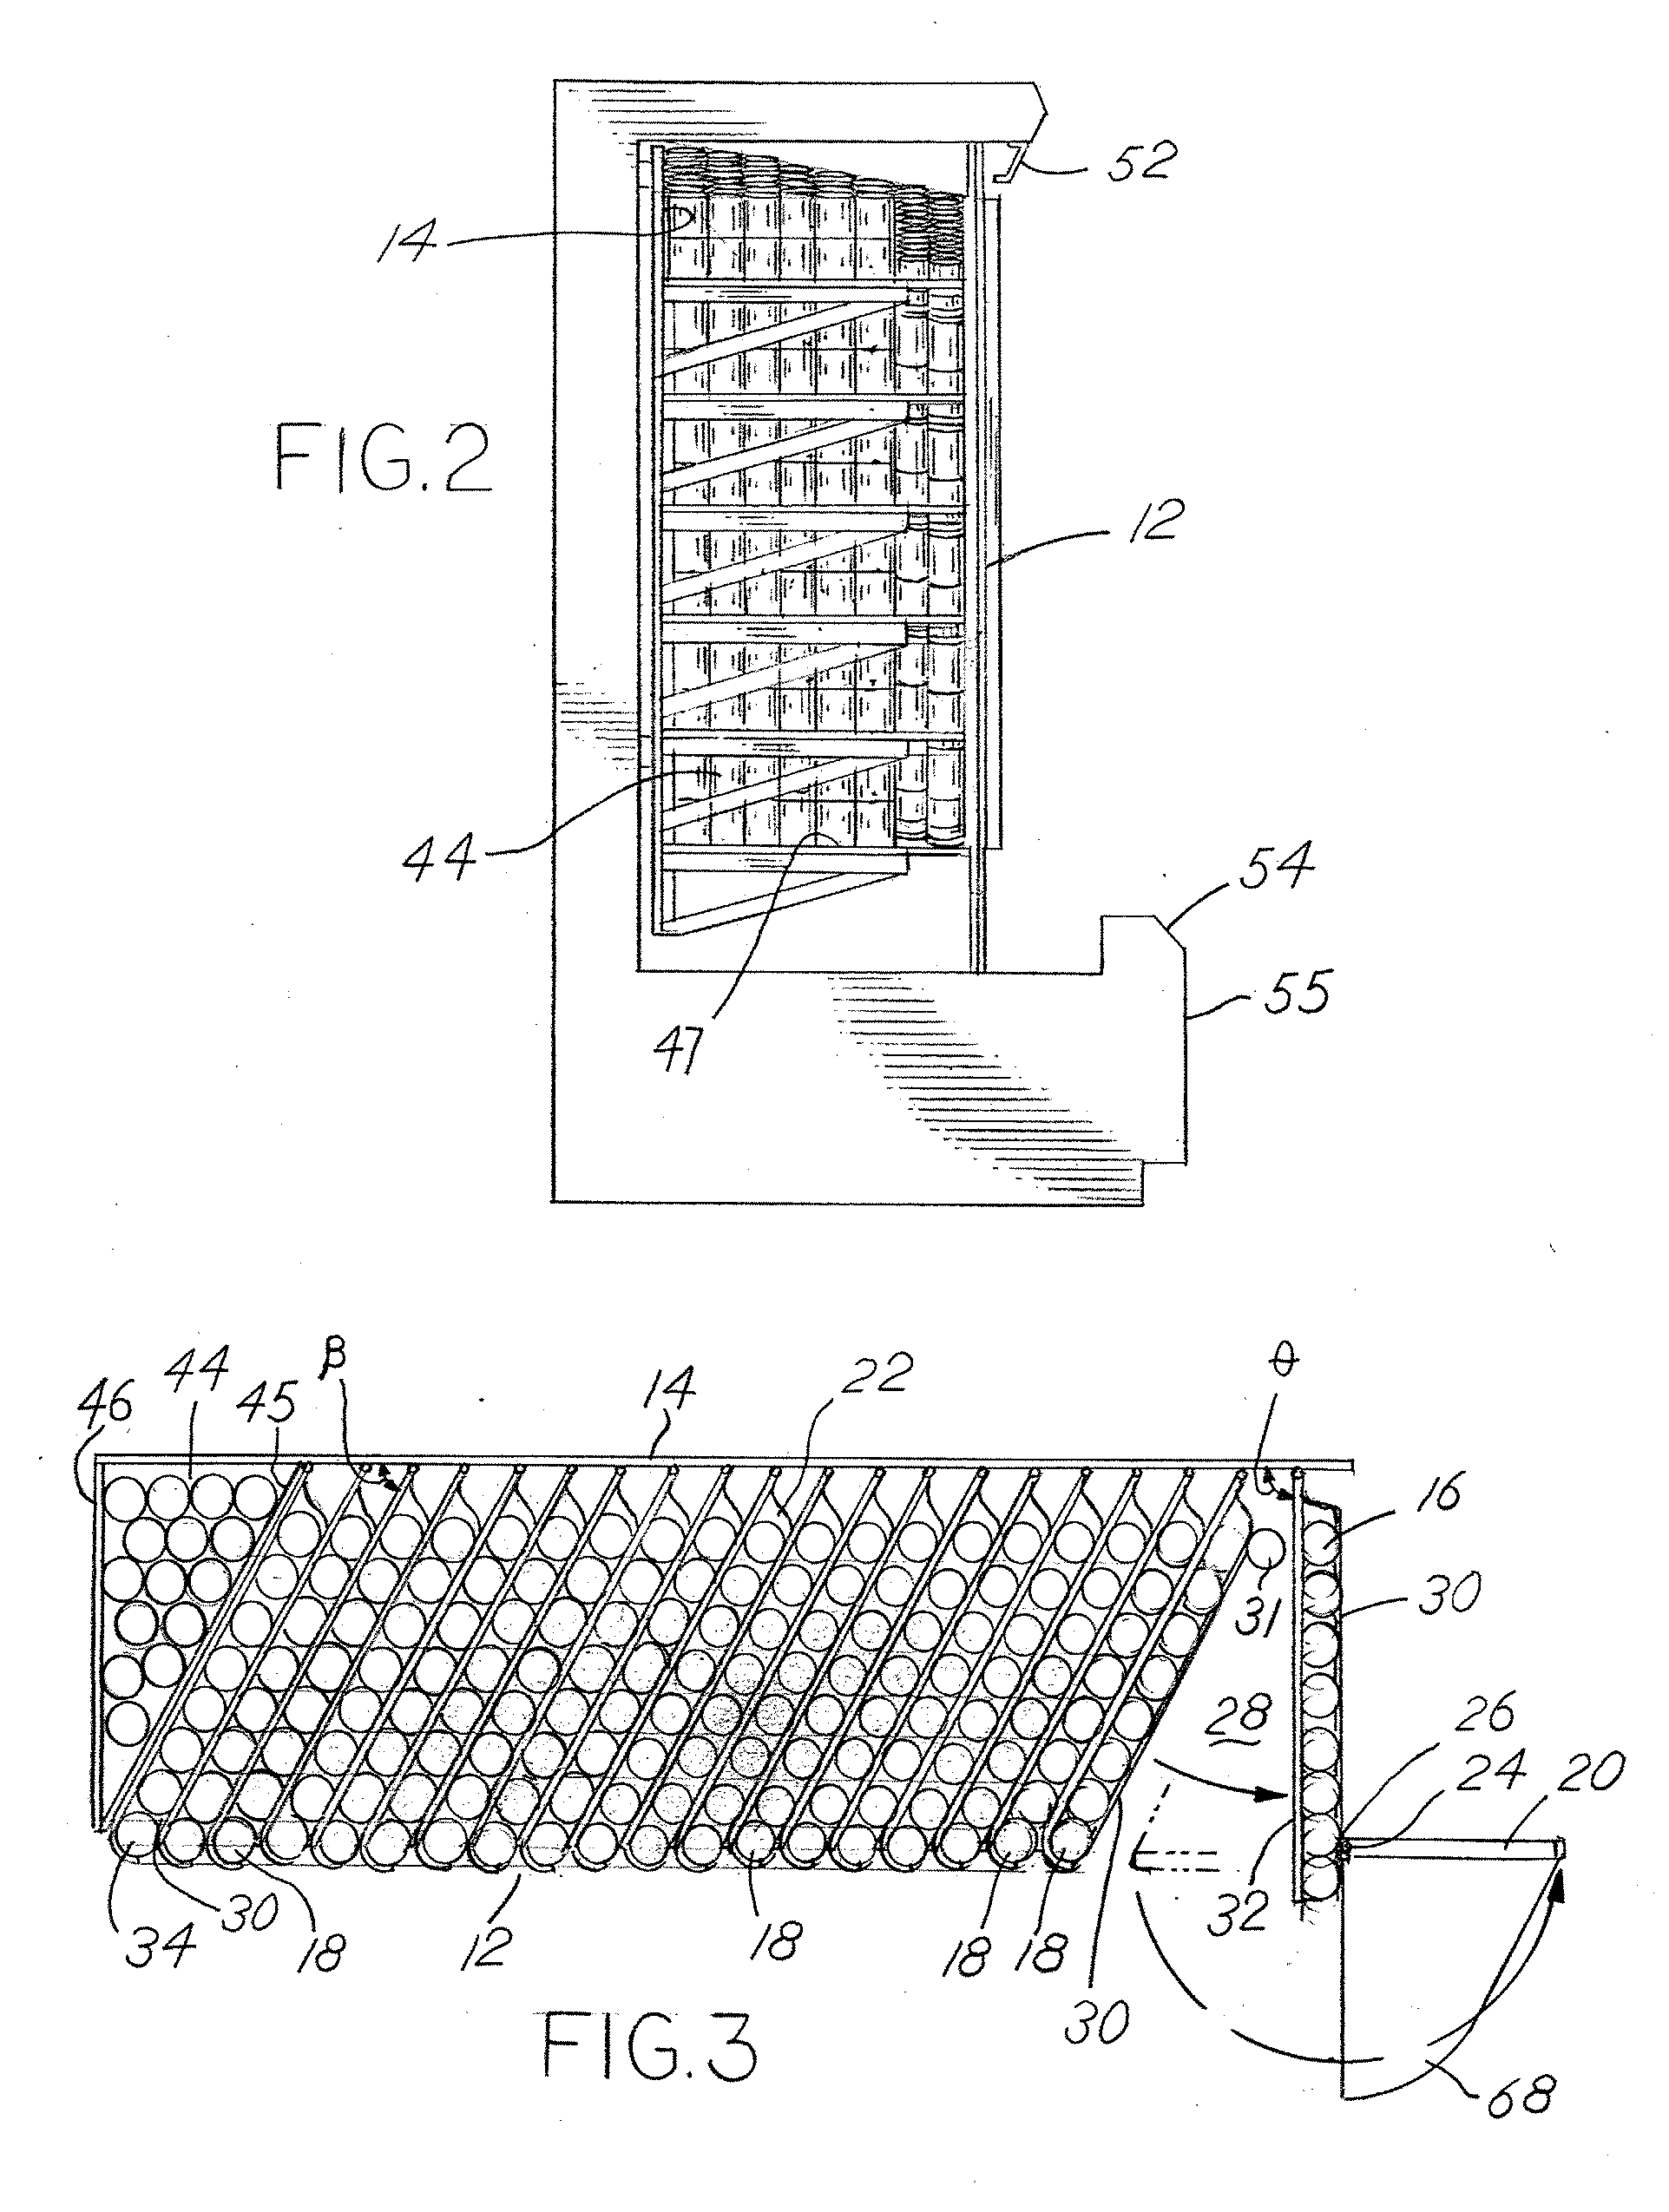 Merchandising System with Flippable Column and/or Item Stop